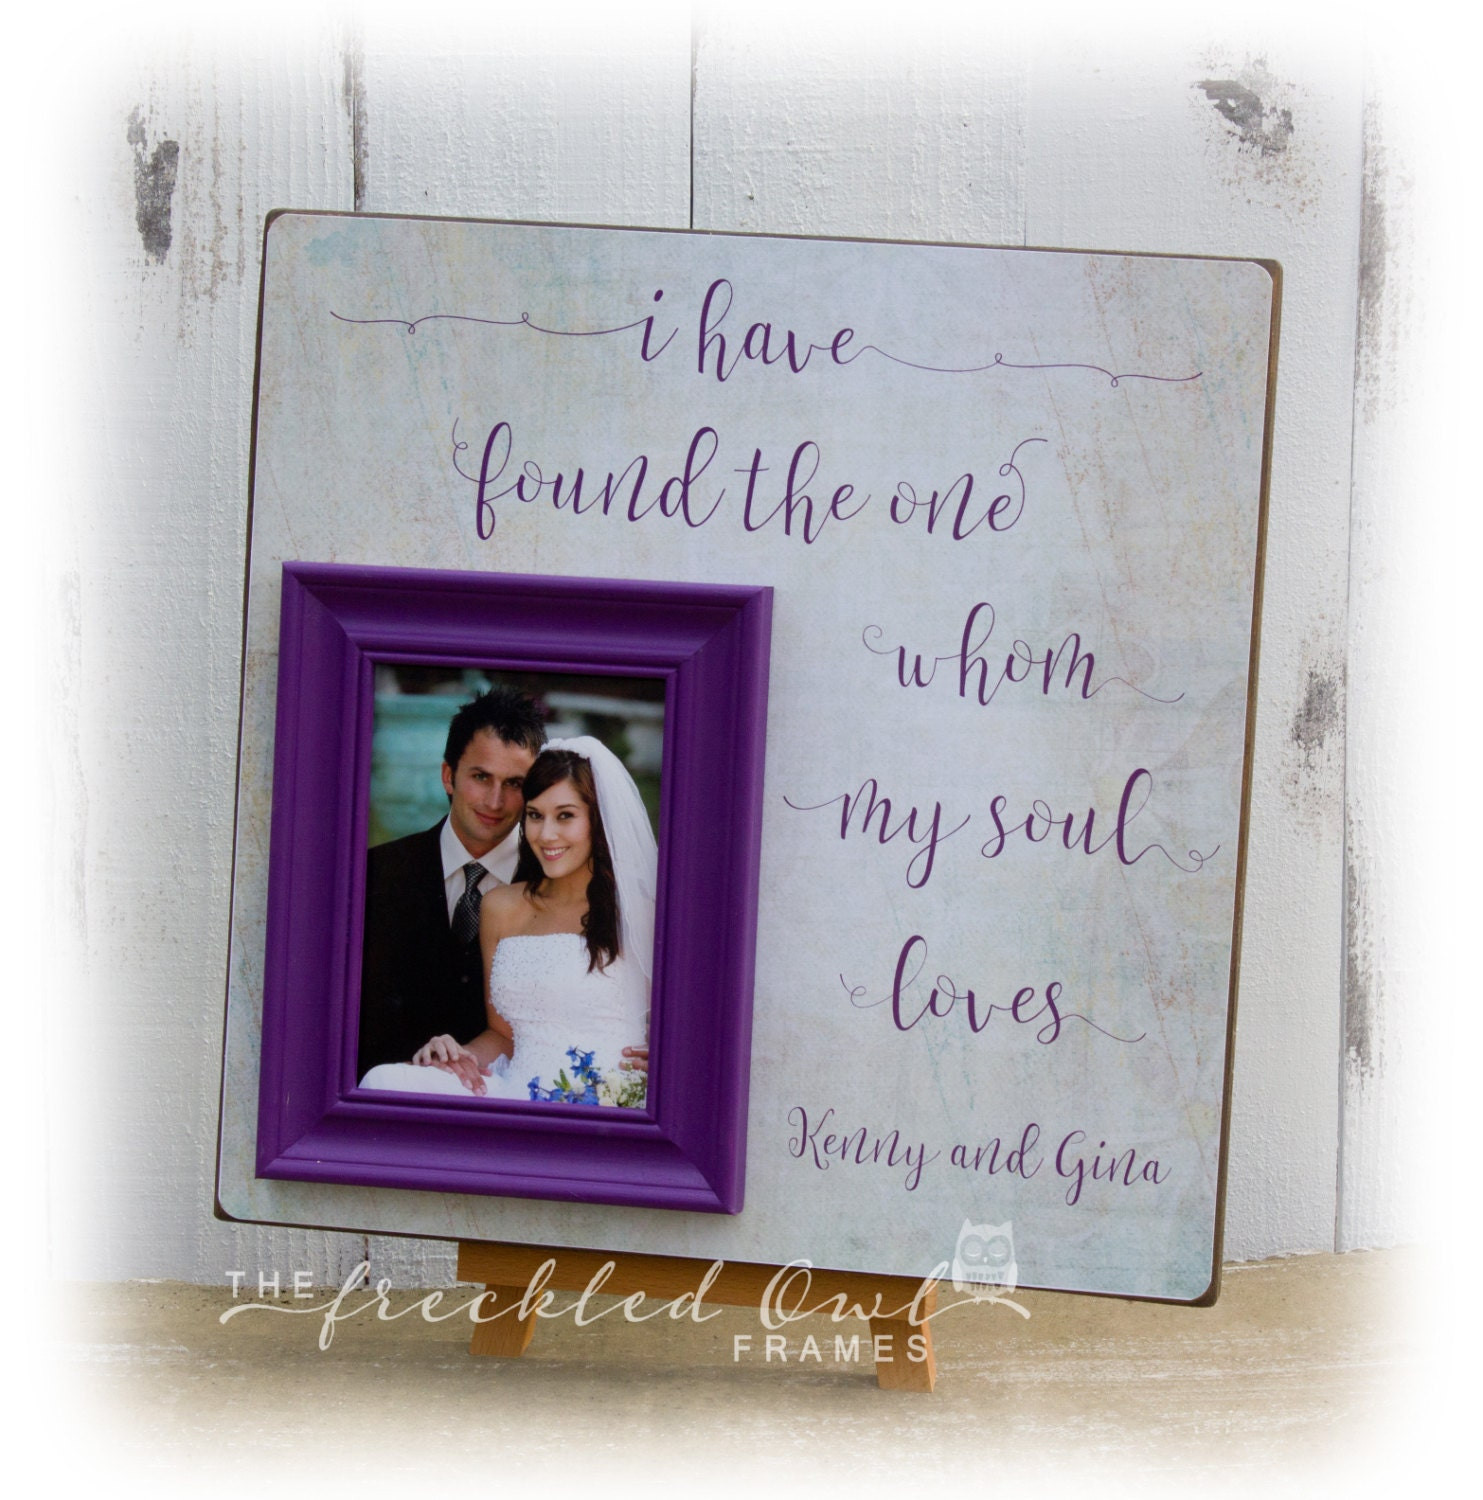 Gift Card Ideas For Couples
 WEDDING GIFTS for Couple Personalized Wedding Gift Ideas